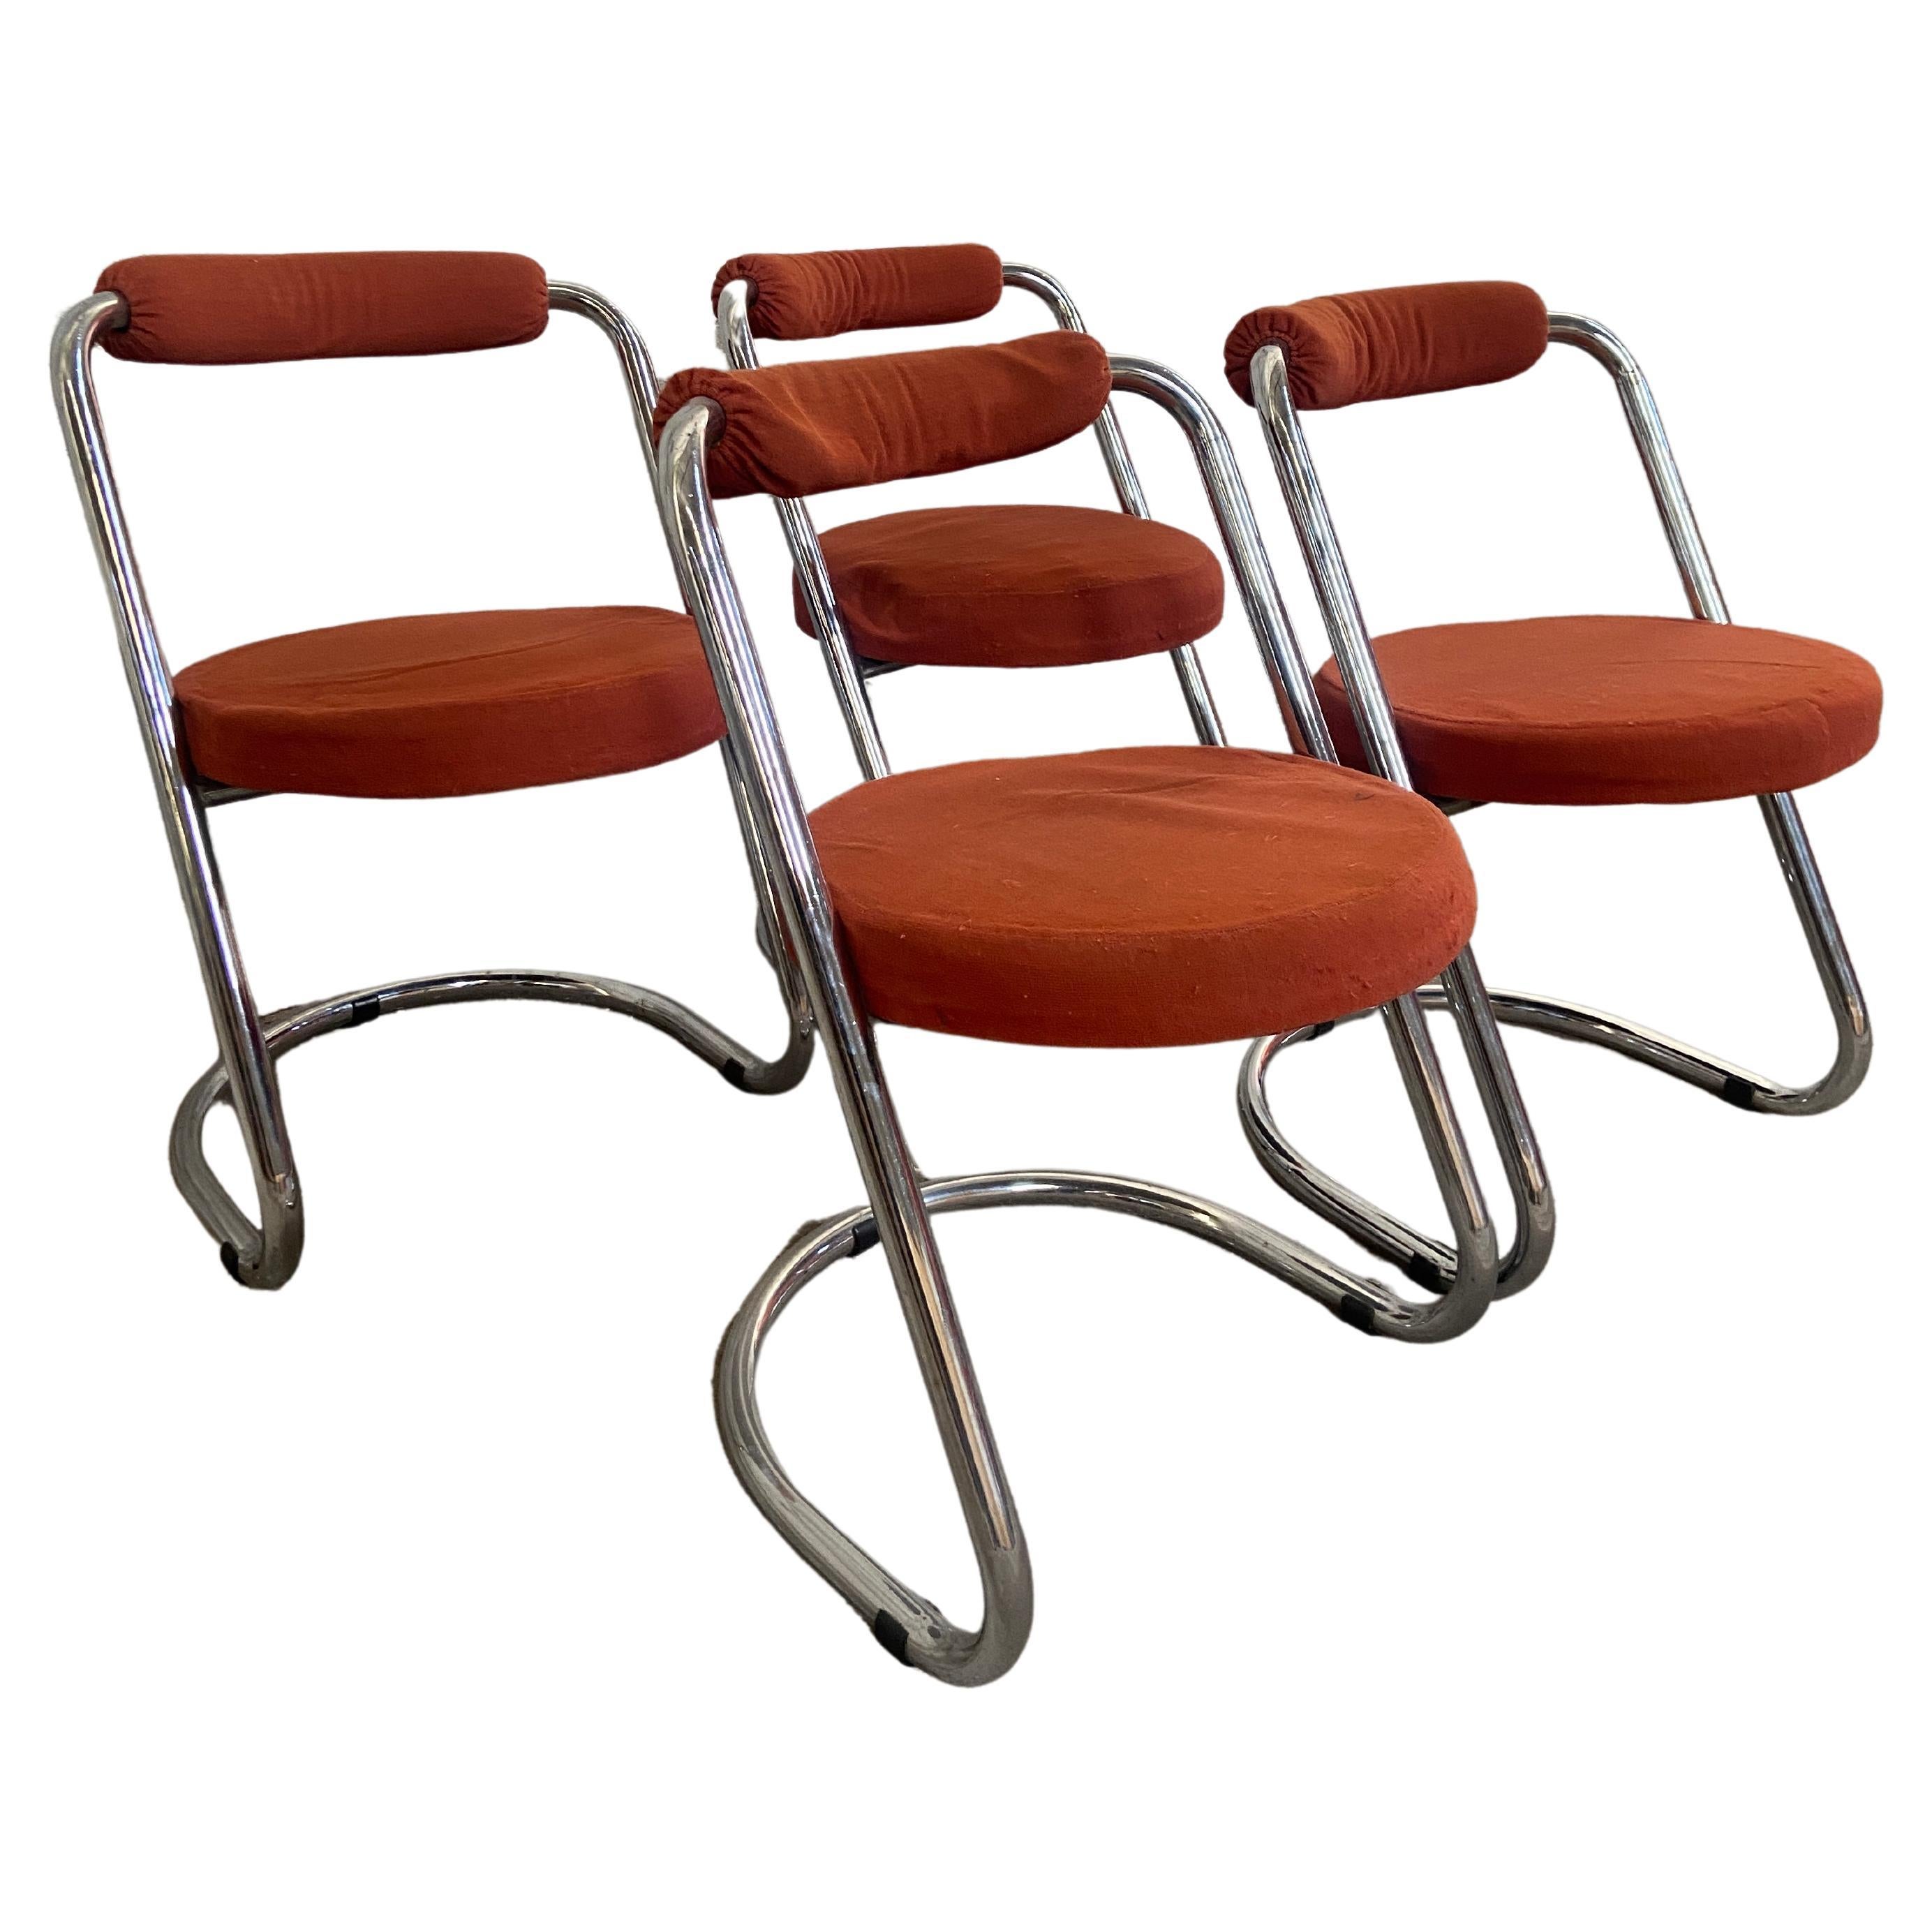 Mid-Century Modern Italian Set of 4 Giotto Stoppino Chrome Chairs from 1970s For Sale